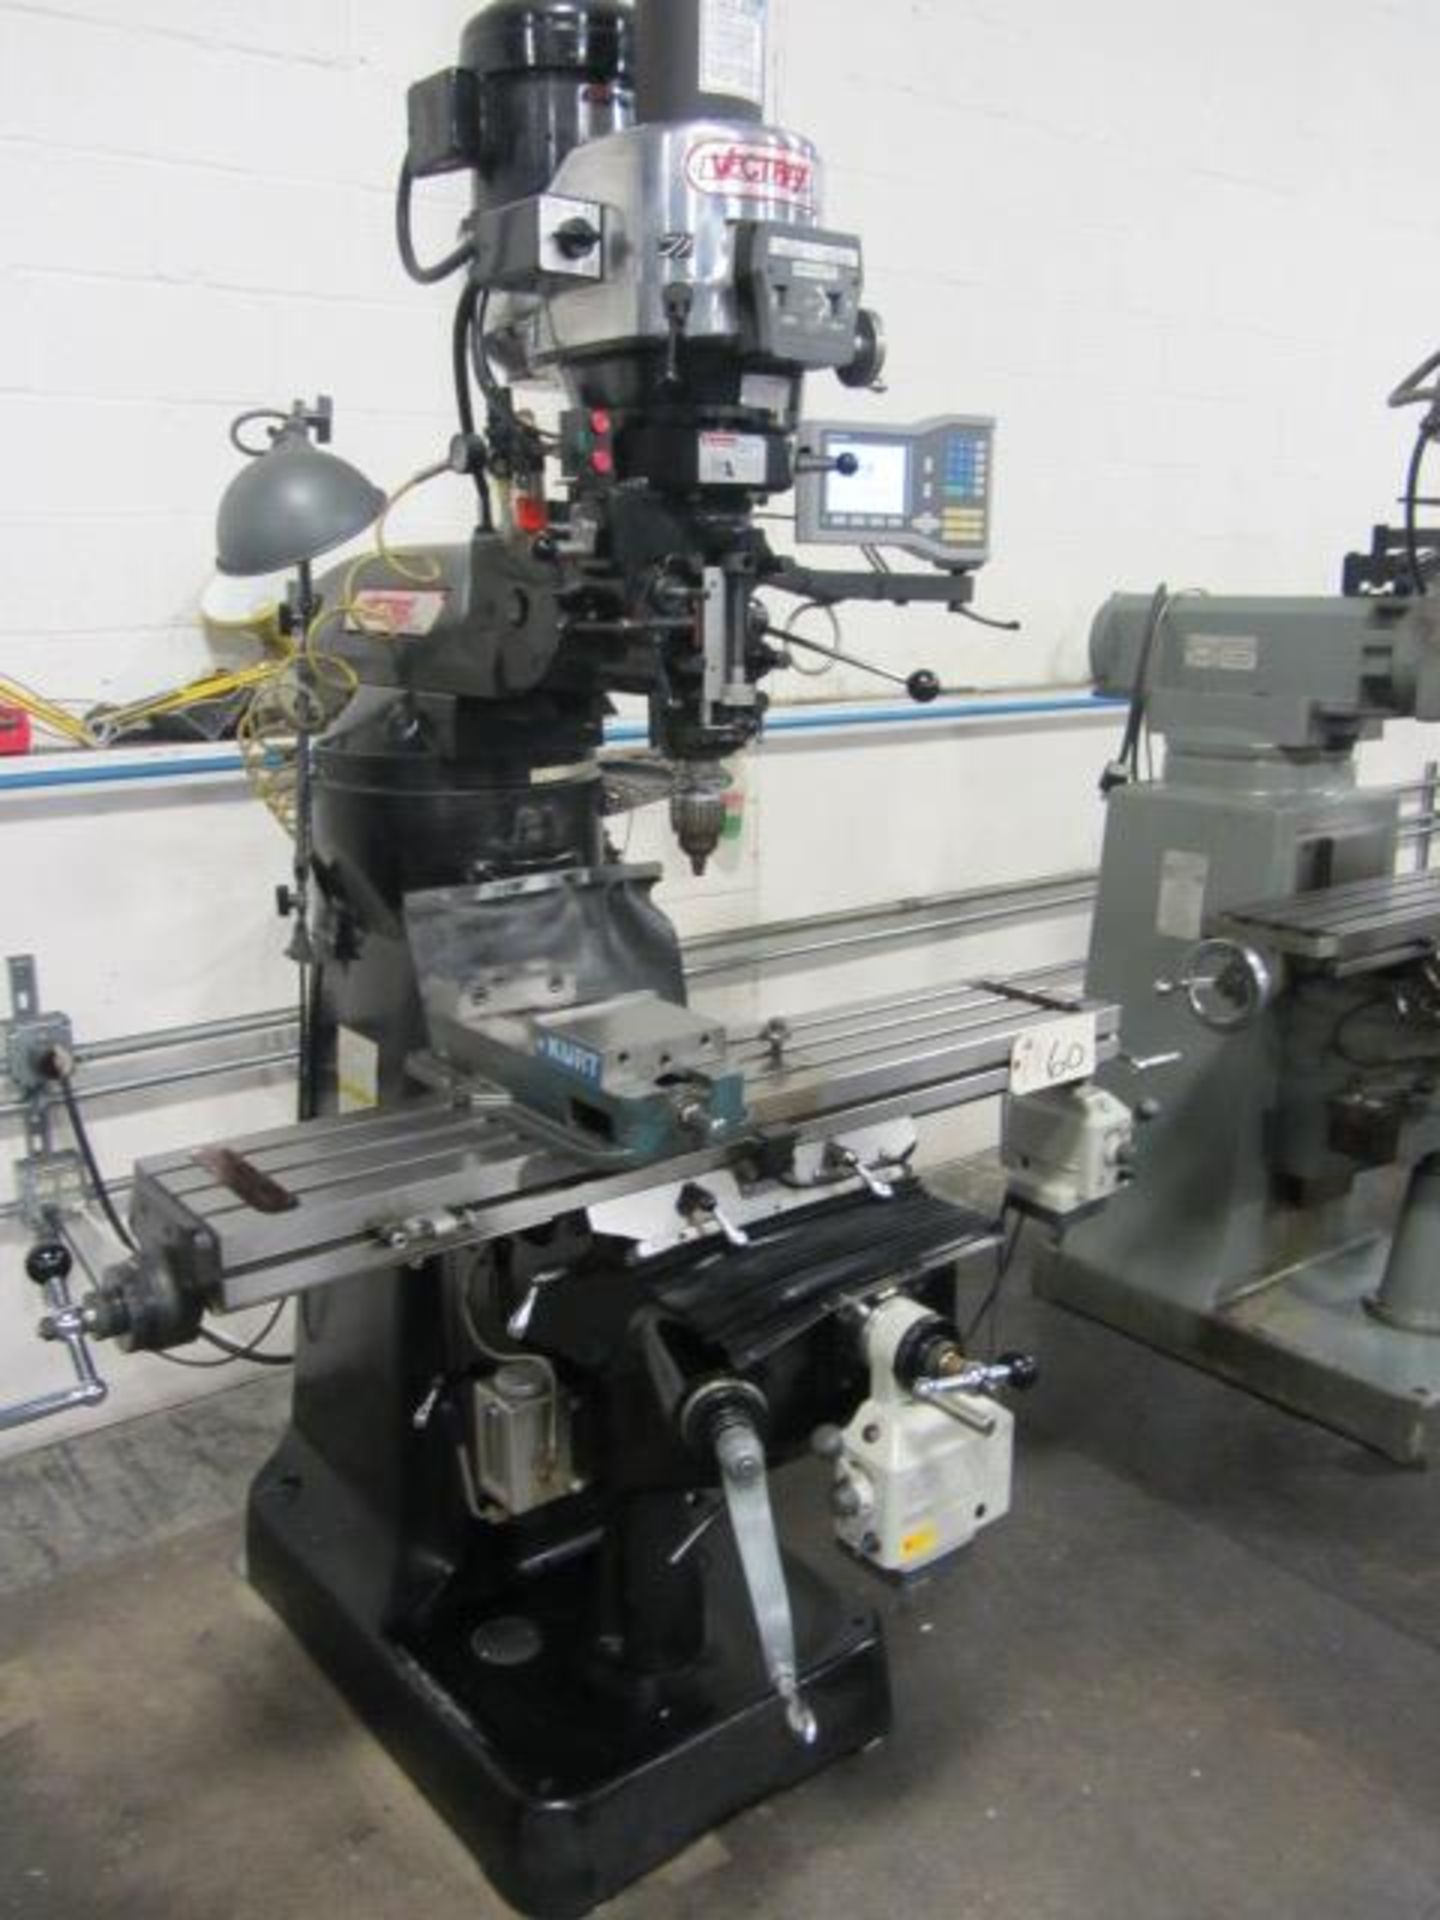 Vectrax Vari-Speed Vertical Milling Machine with 9'' x 48'' Power Feed Table, Longitudinal Power - Image 6 of 7